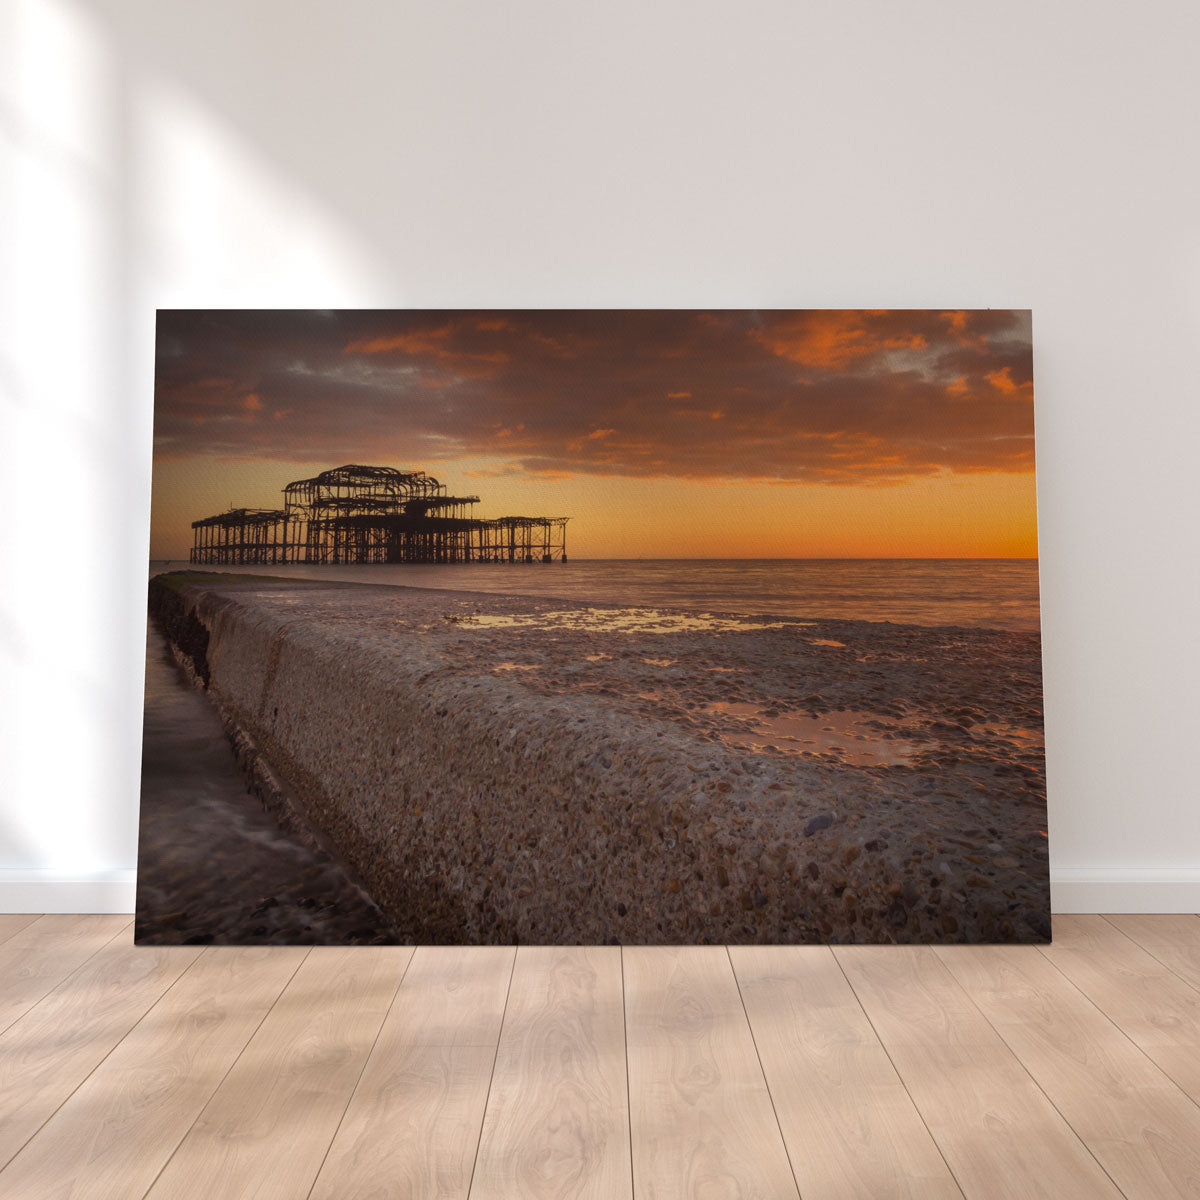 Sunset at West Pier